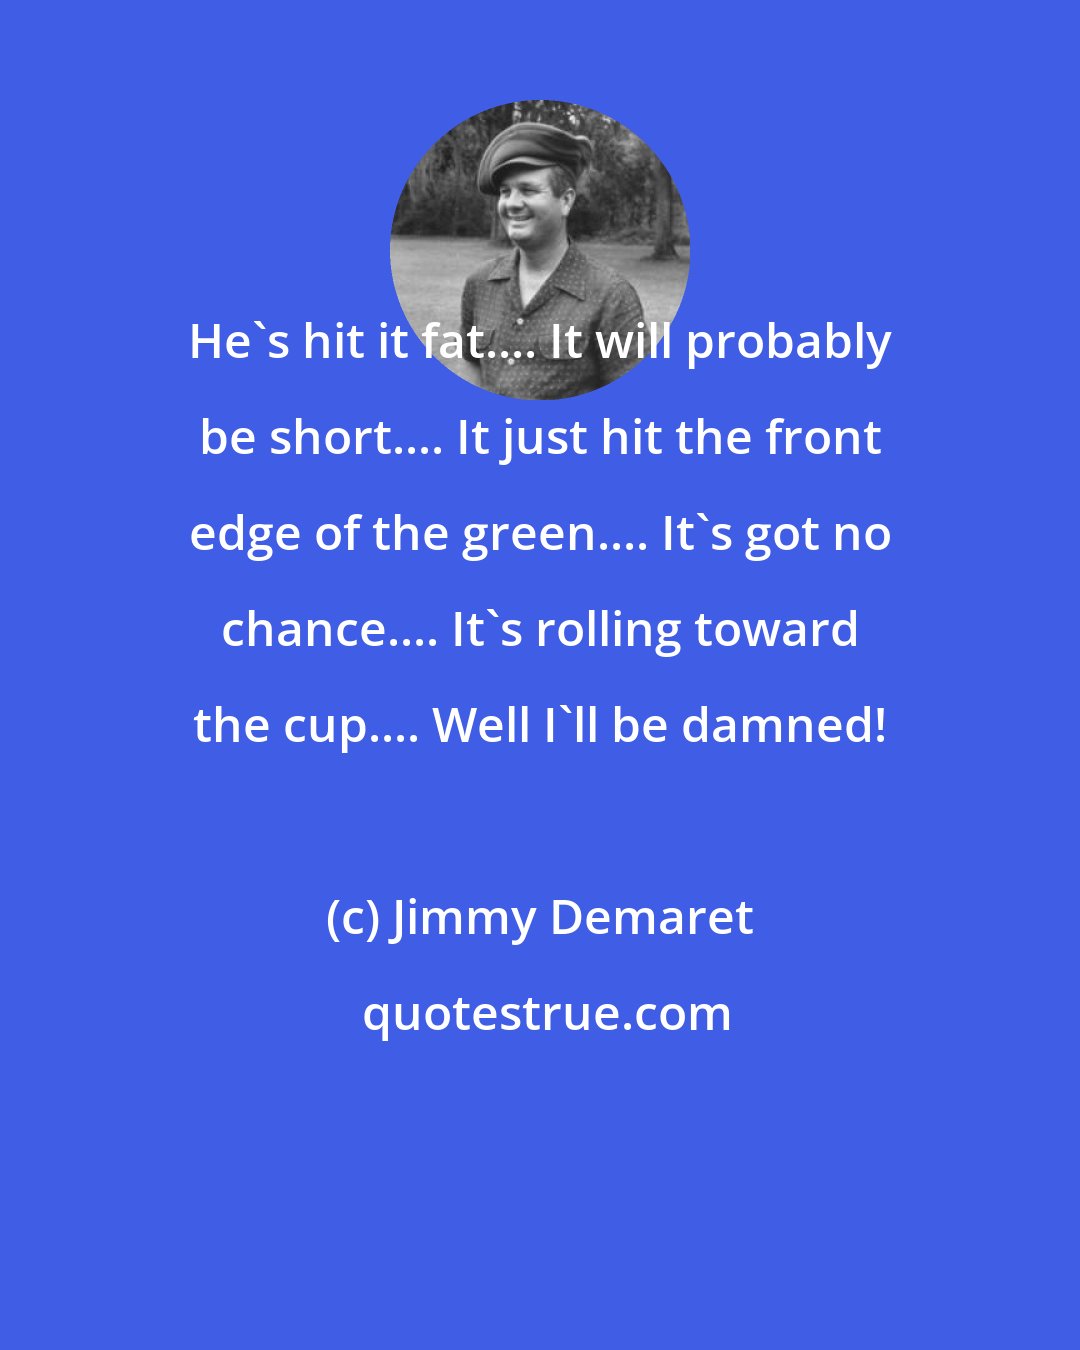 Jimmy Demaret: He's hit it fat.... It will probably be short.... It just hit the front edge of the green.... It's got no chance.... It's rolling toward the cup.... Well I'll be damned!